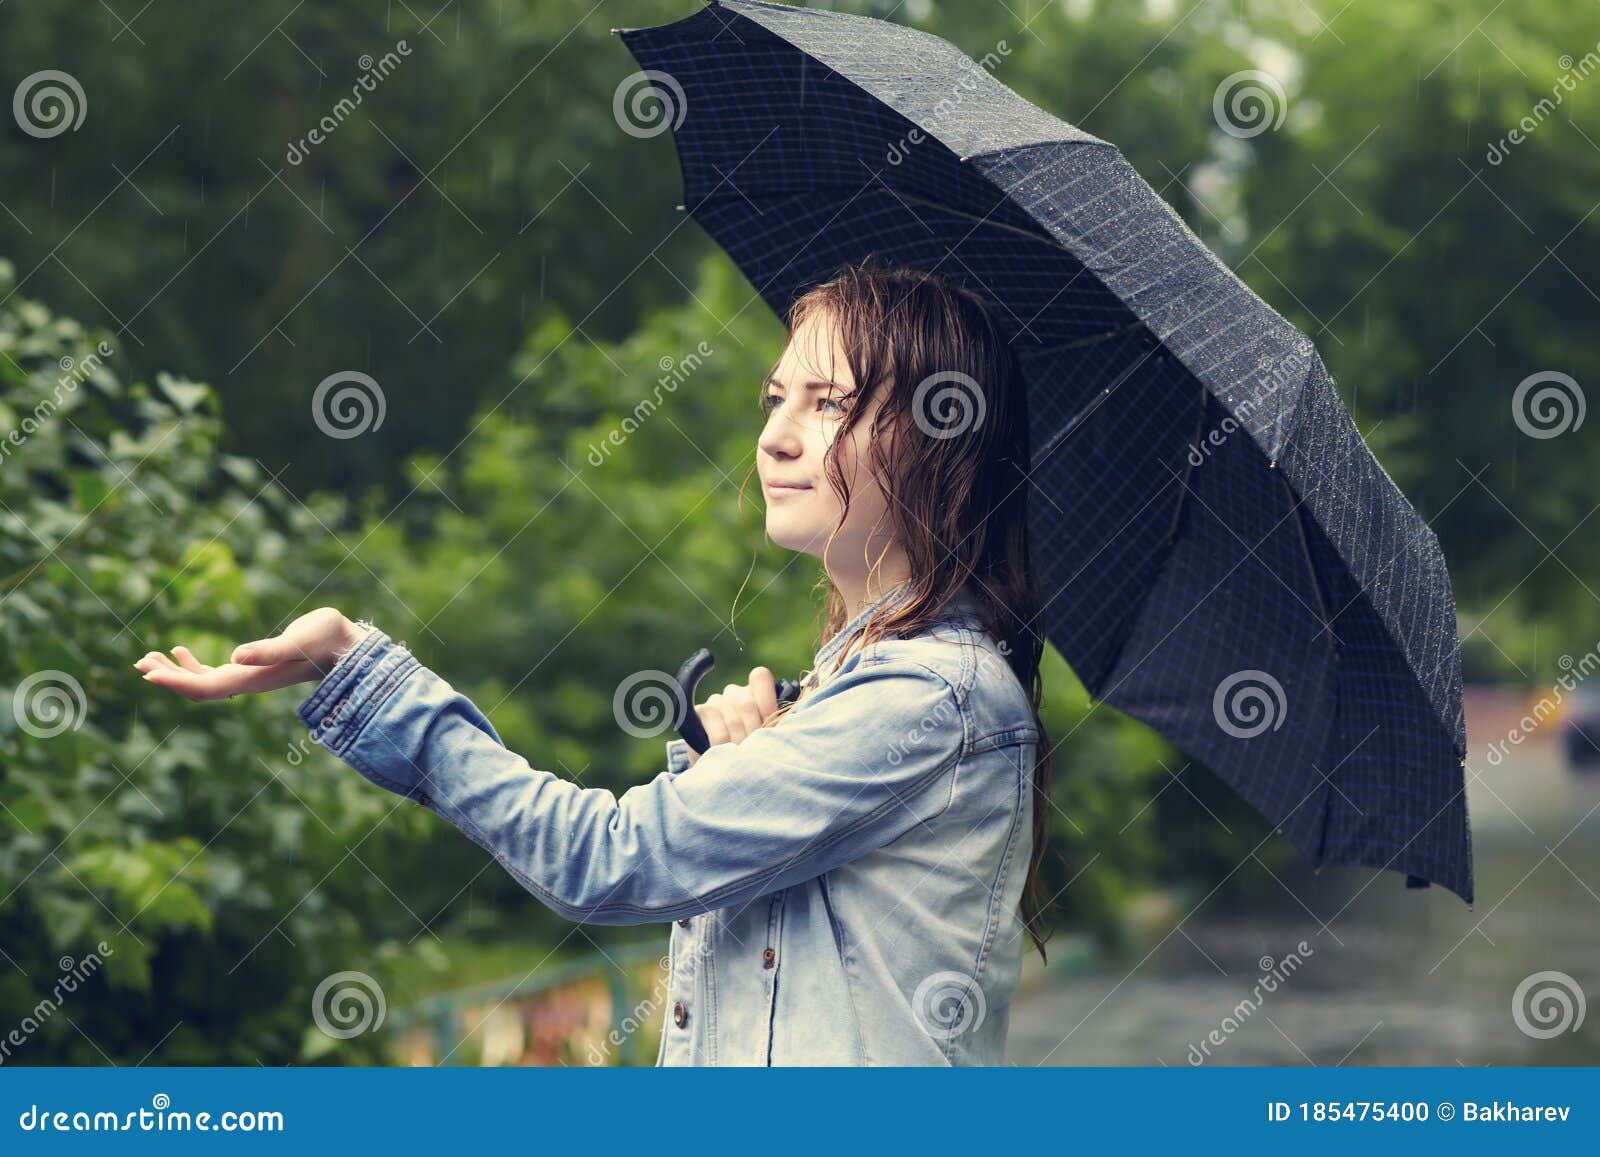 walking in the rain without an umbrella